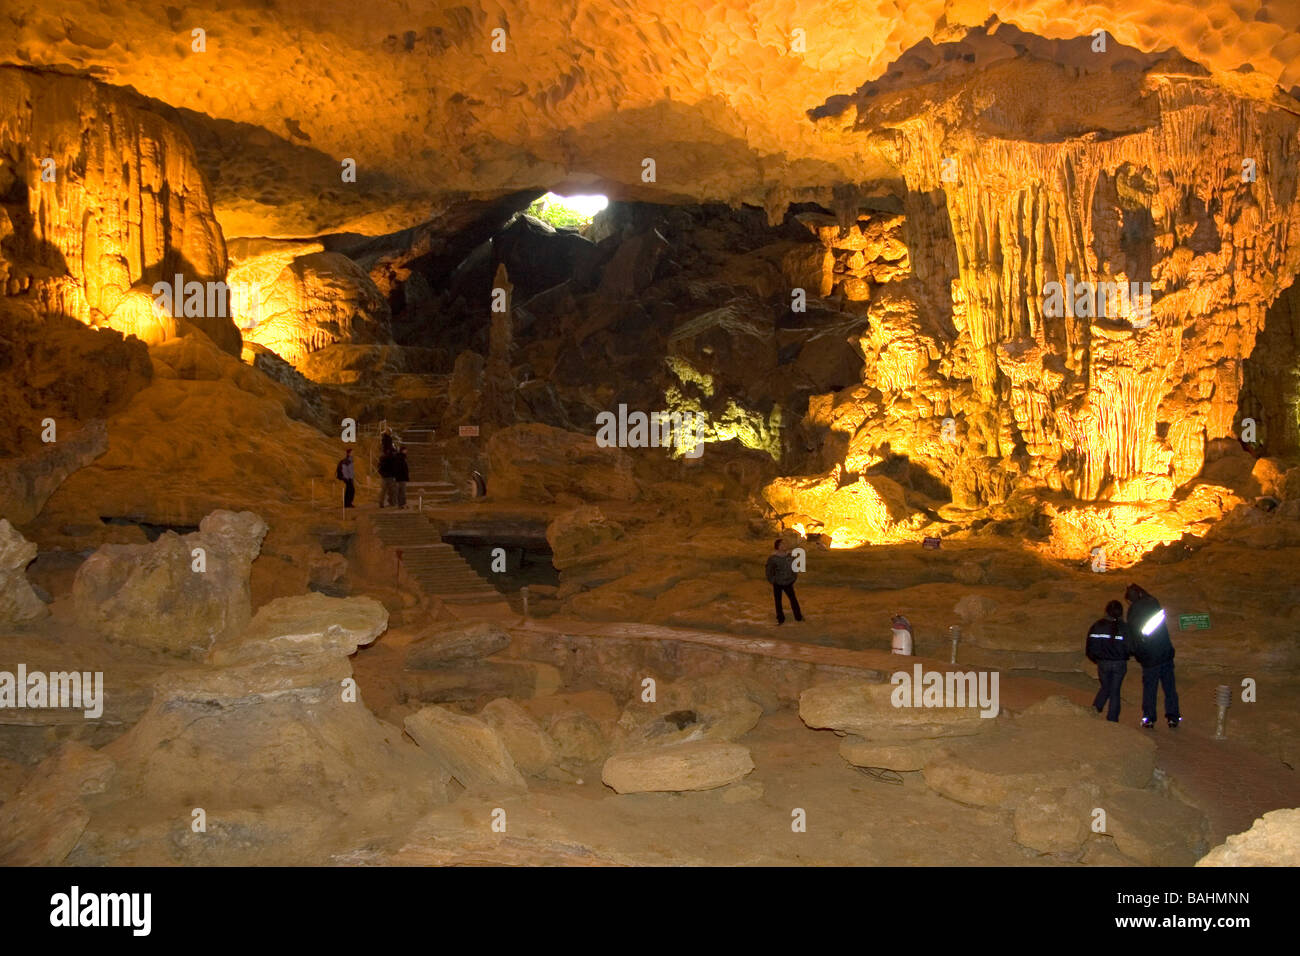 Interior of the Hang Sung Sot caves in Ha Long Bay Vietnam Stock Photo